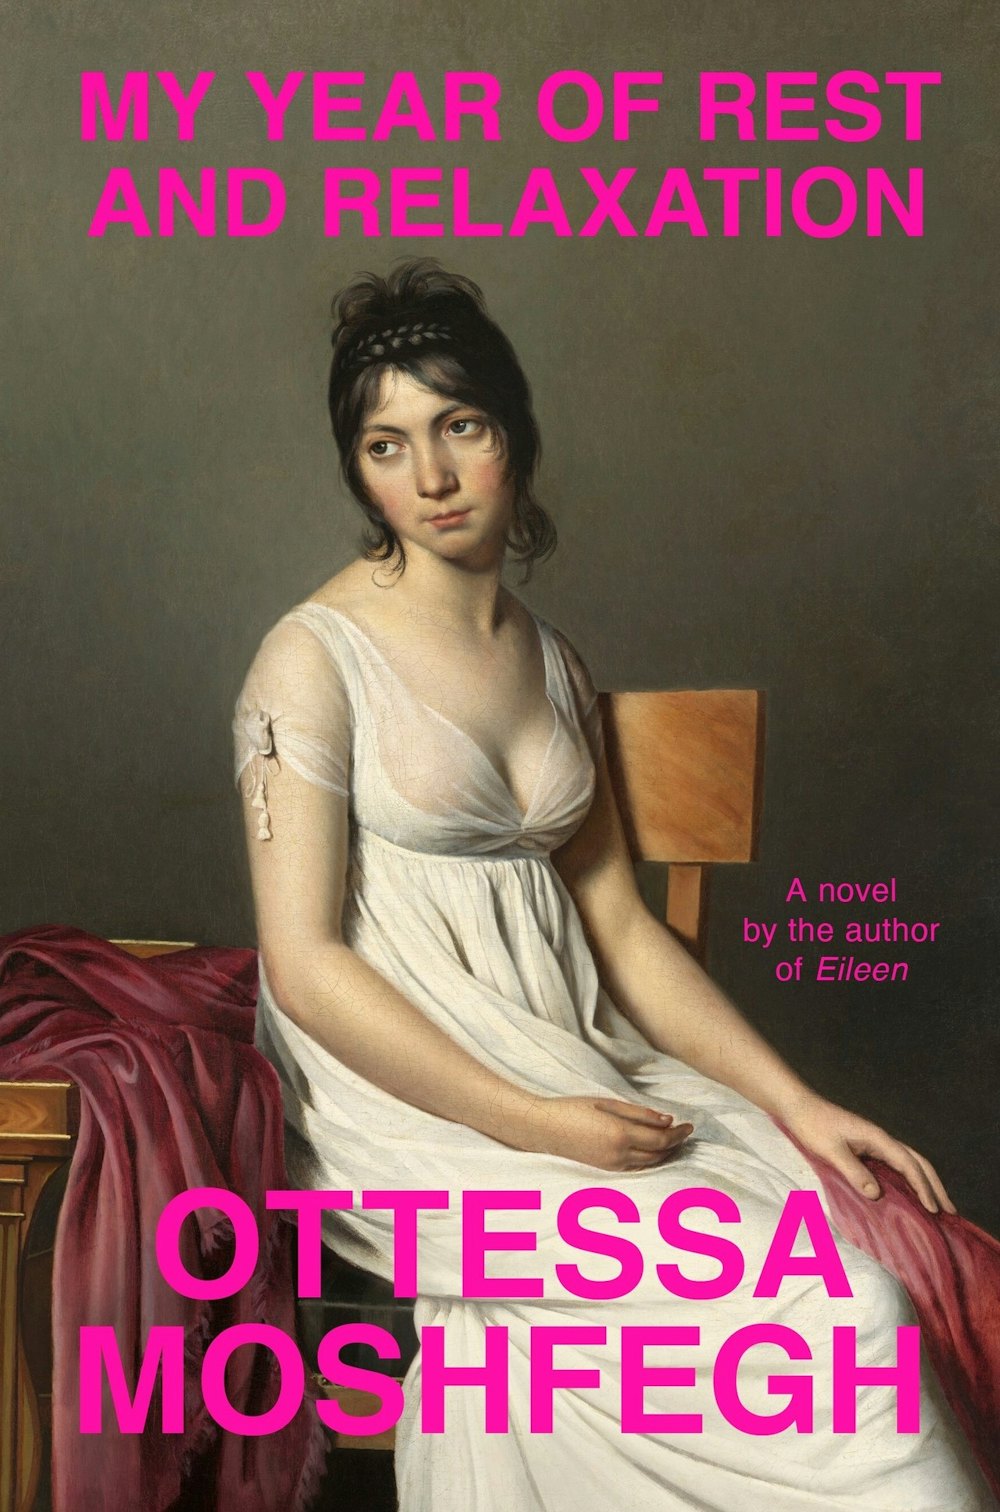 "My Year of Rest and Relaxation" by Ottessa Moshfegh 